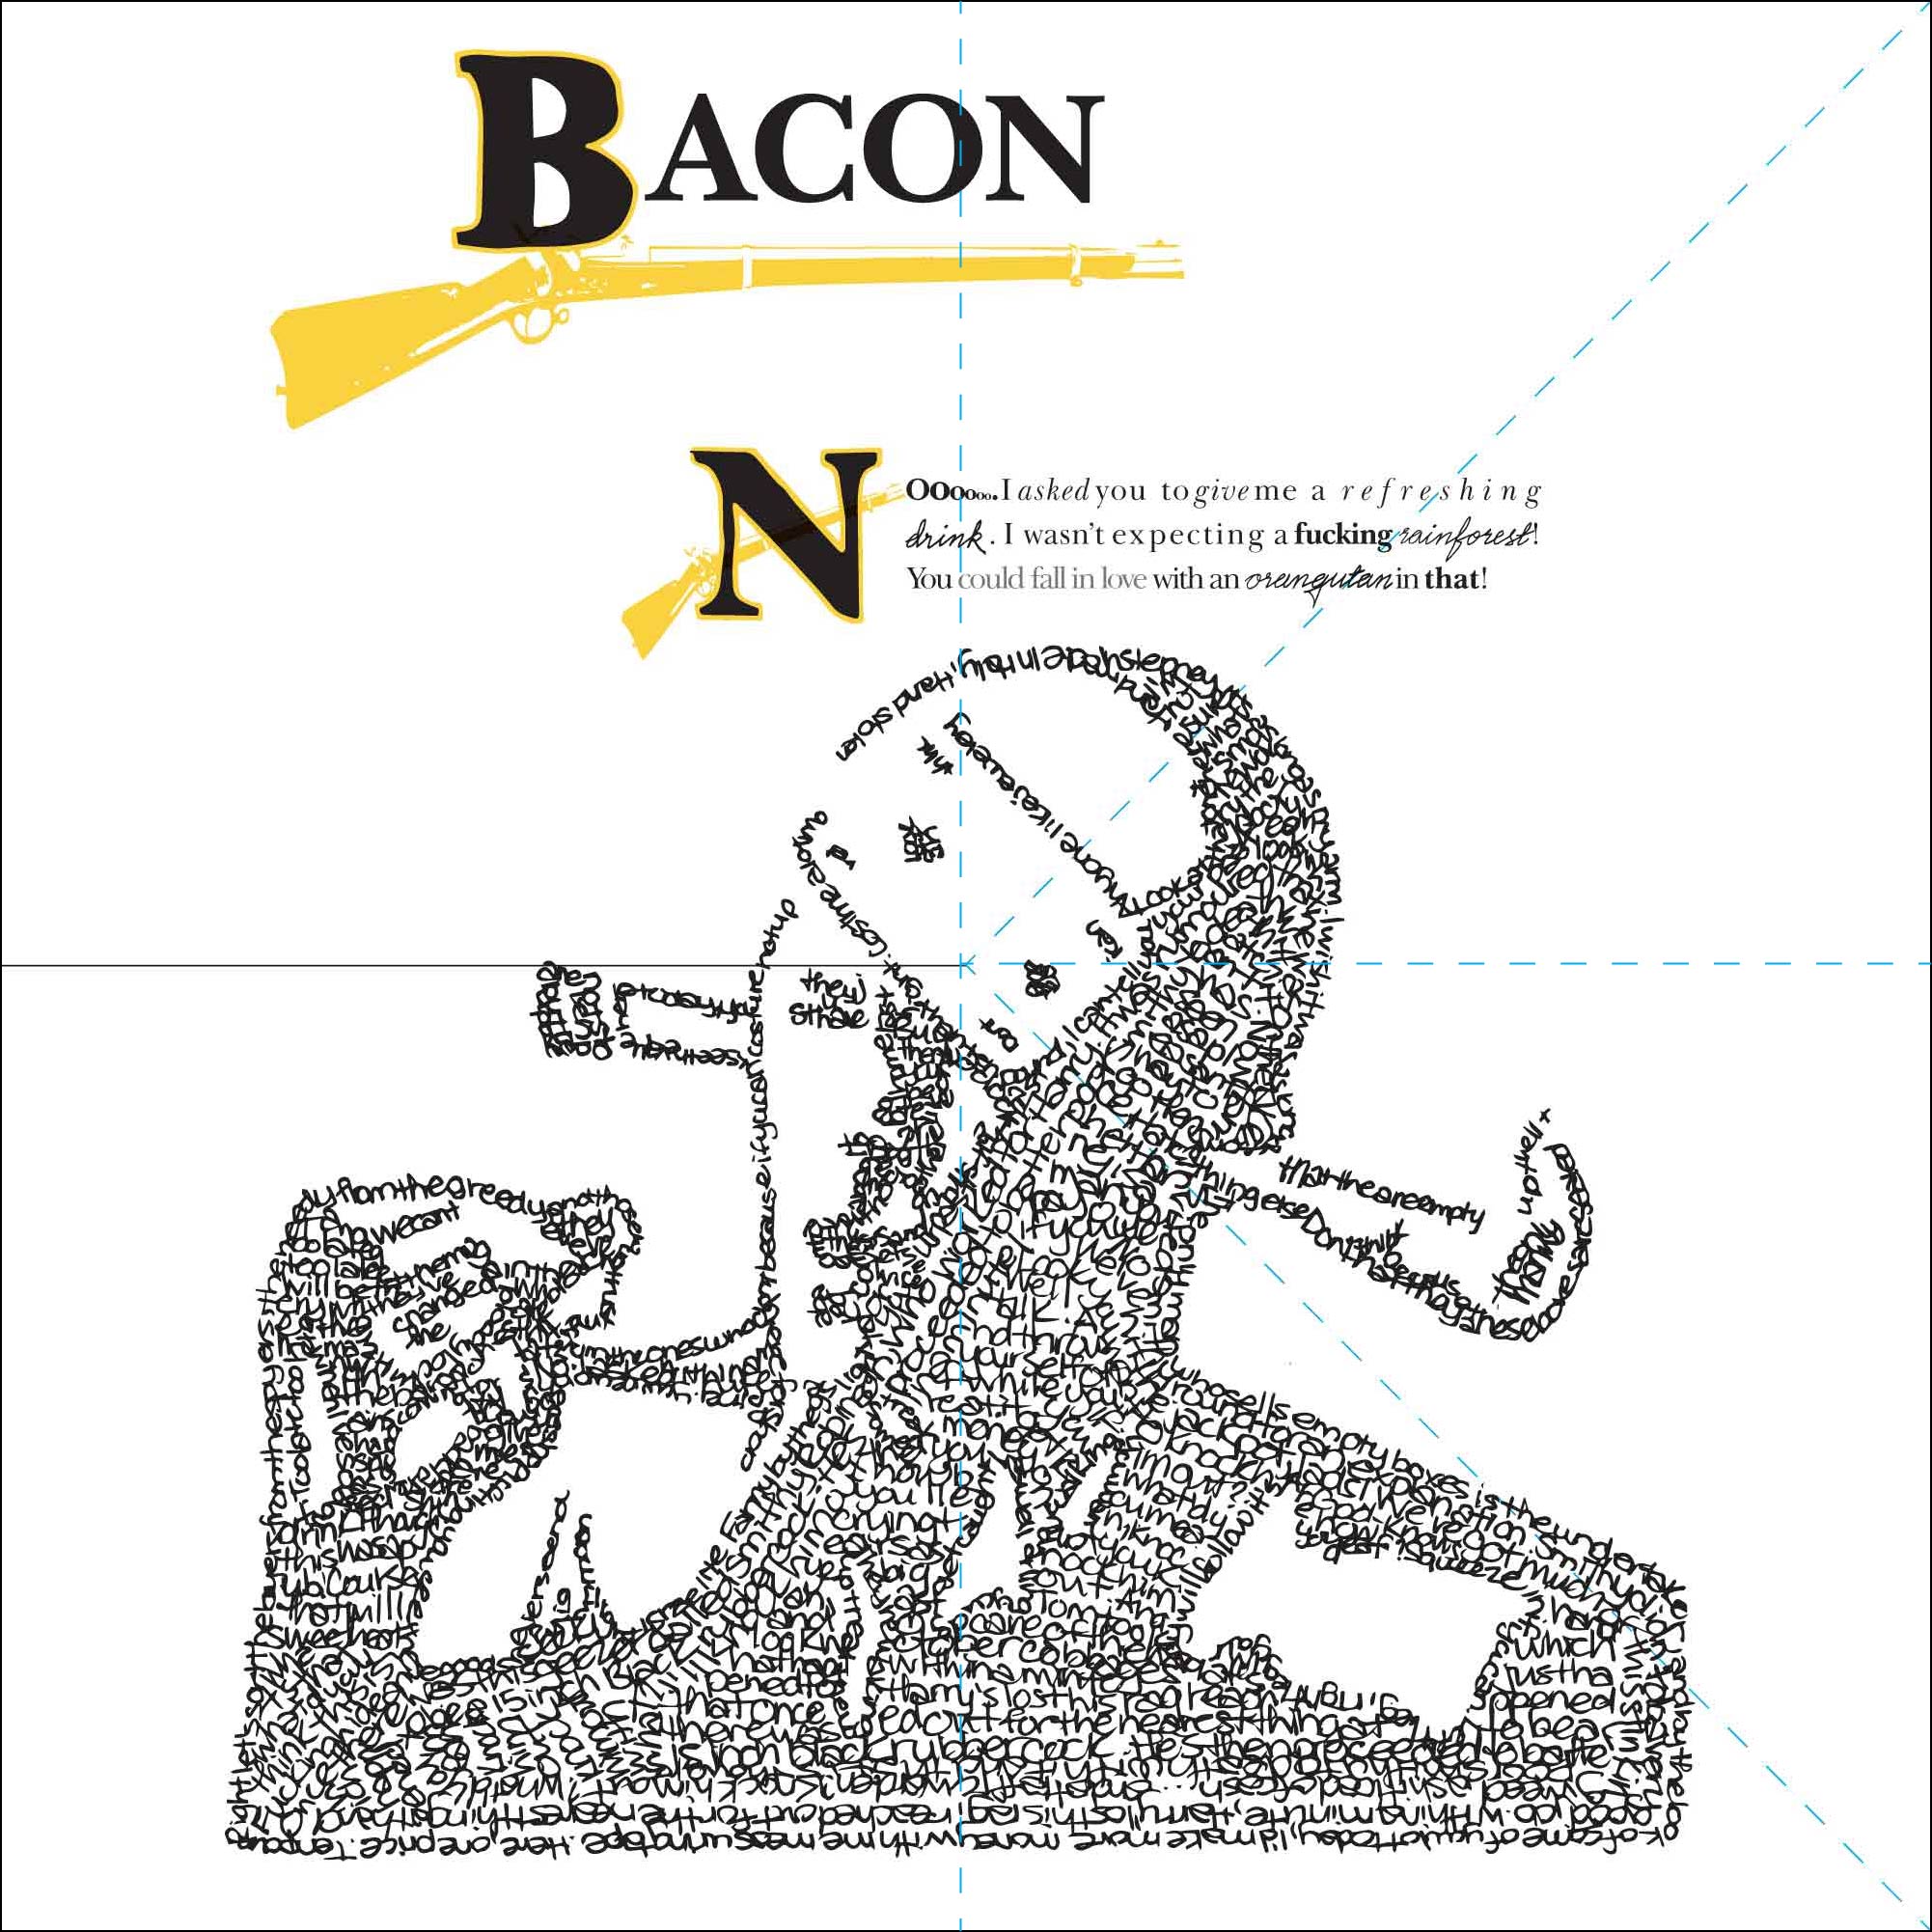 Bacon Fold-out <br> Click to see the back-side